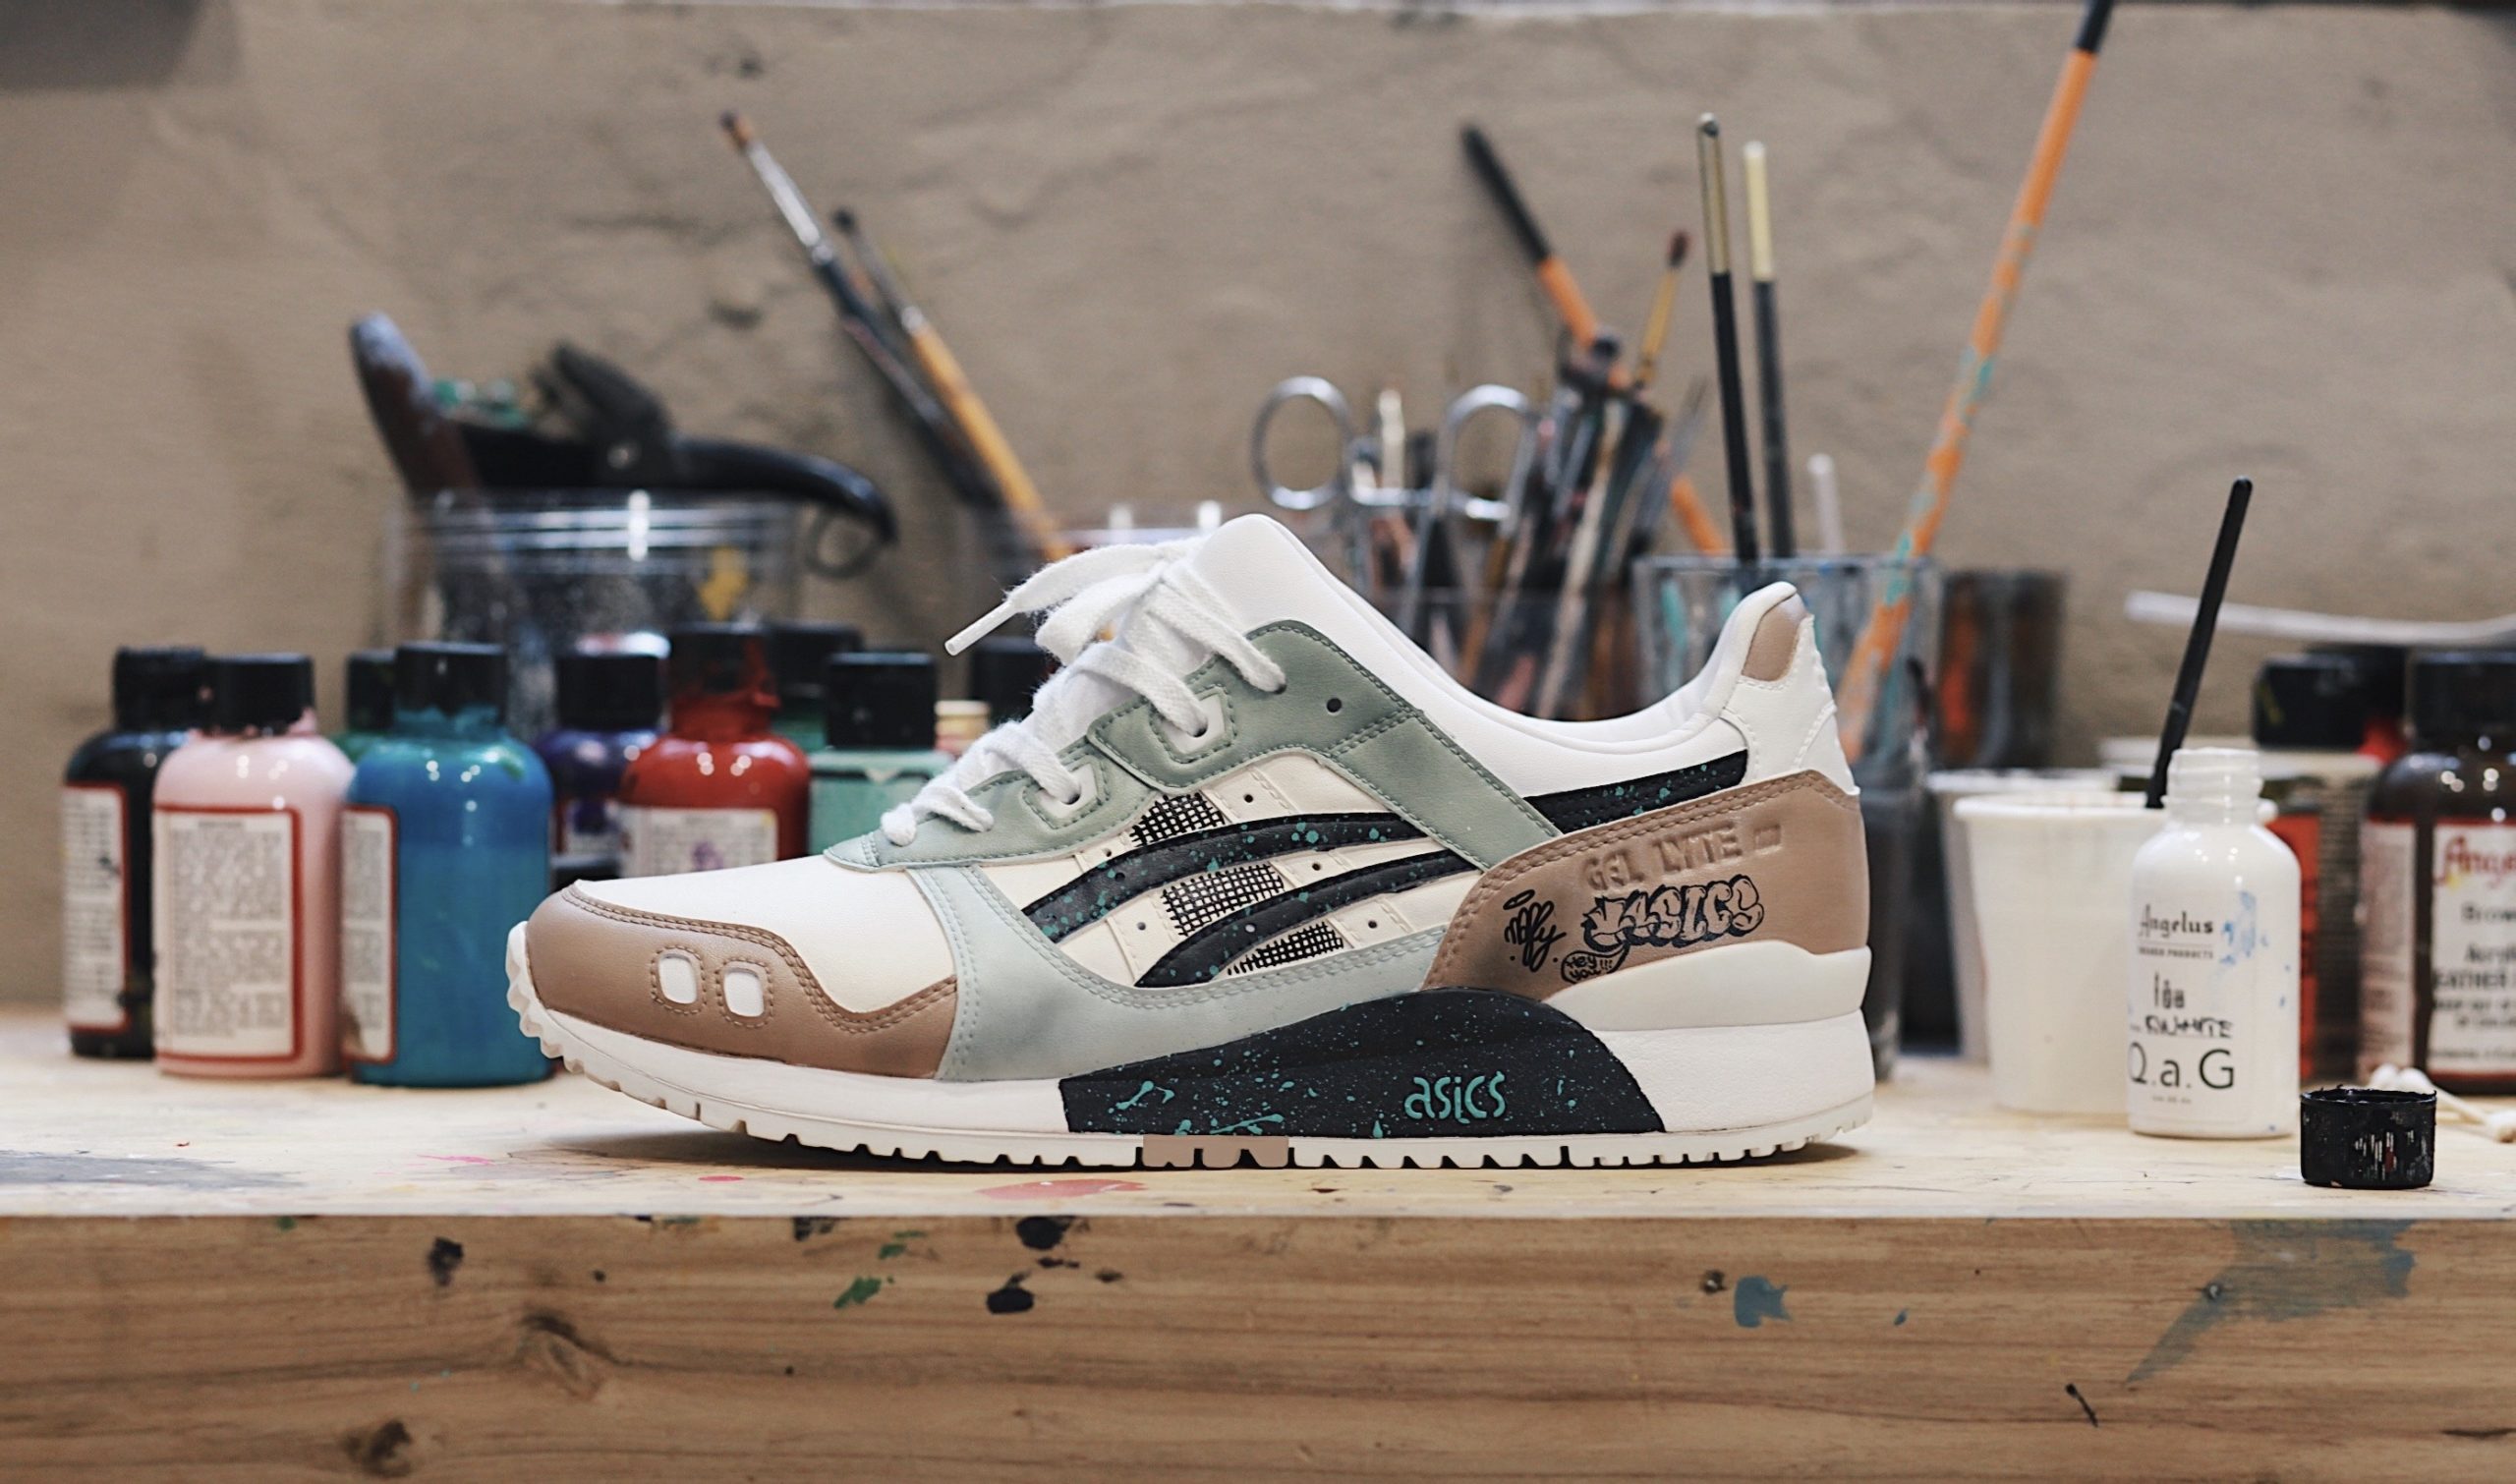 Bản collab ASICS GEL-Lyte III cùng founder HNBMG – “From Here To Fame” |  #HNBMG